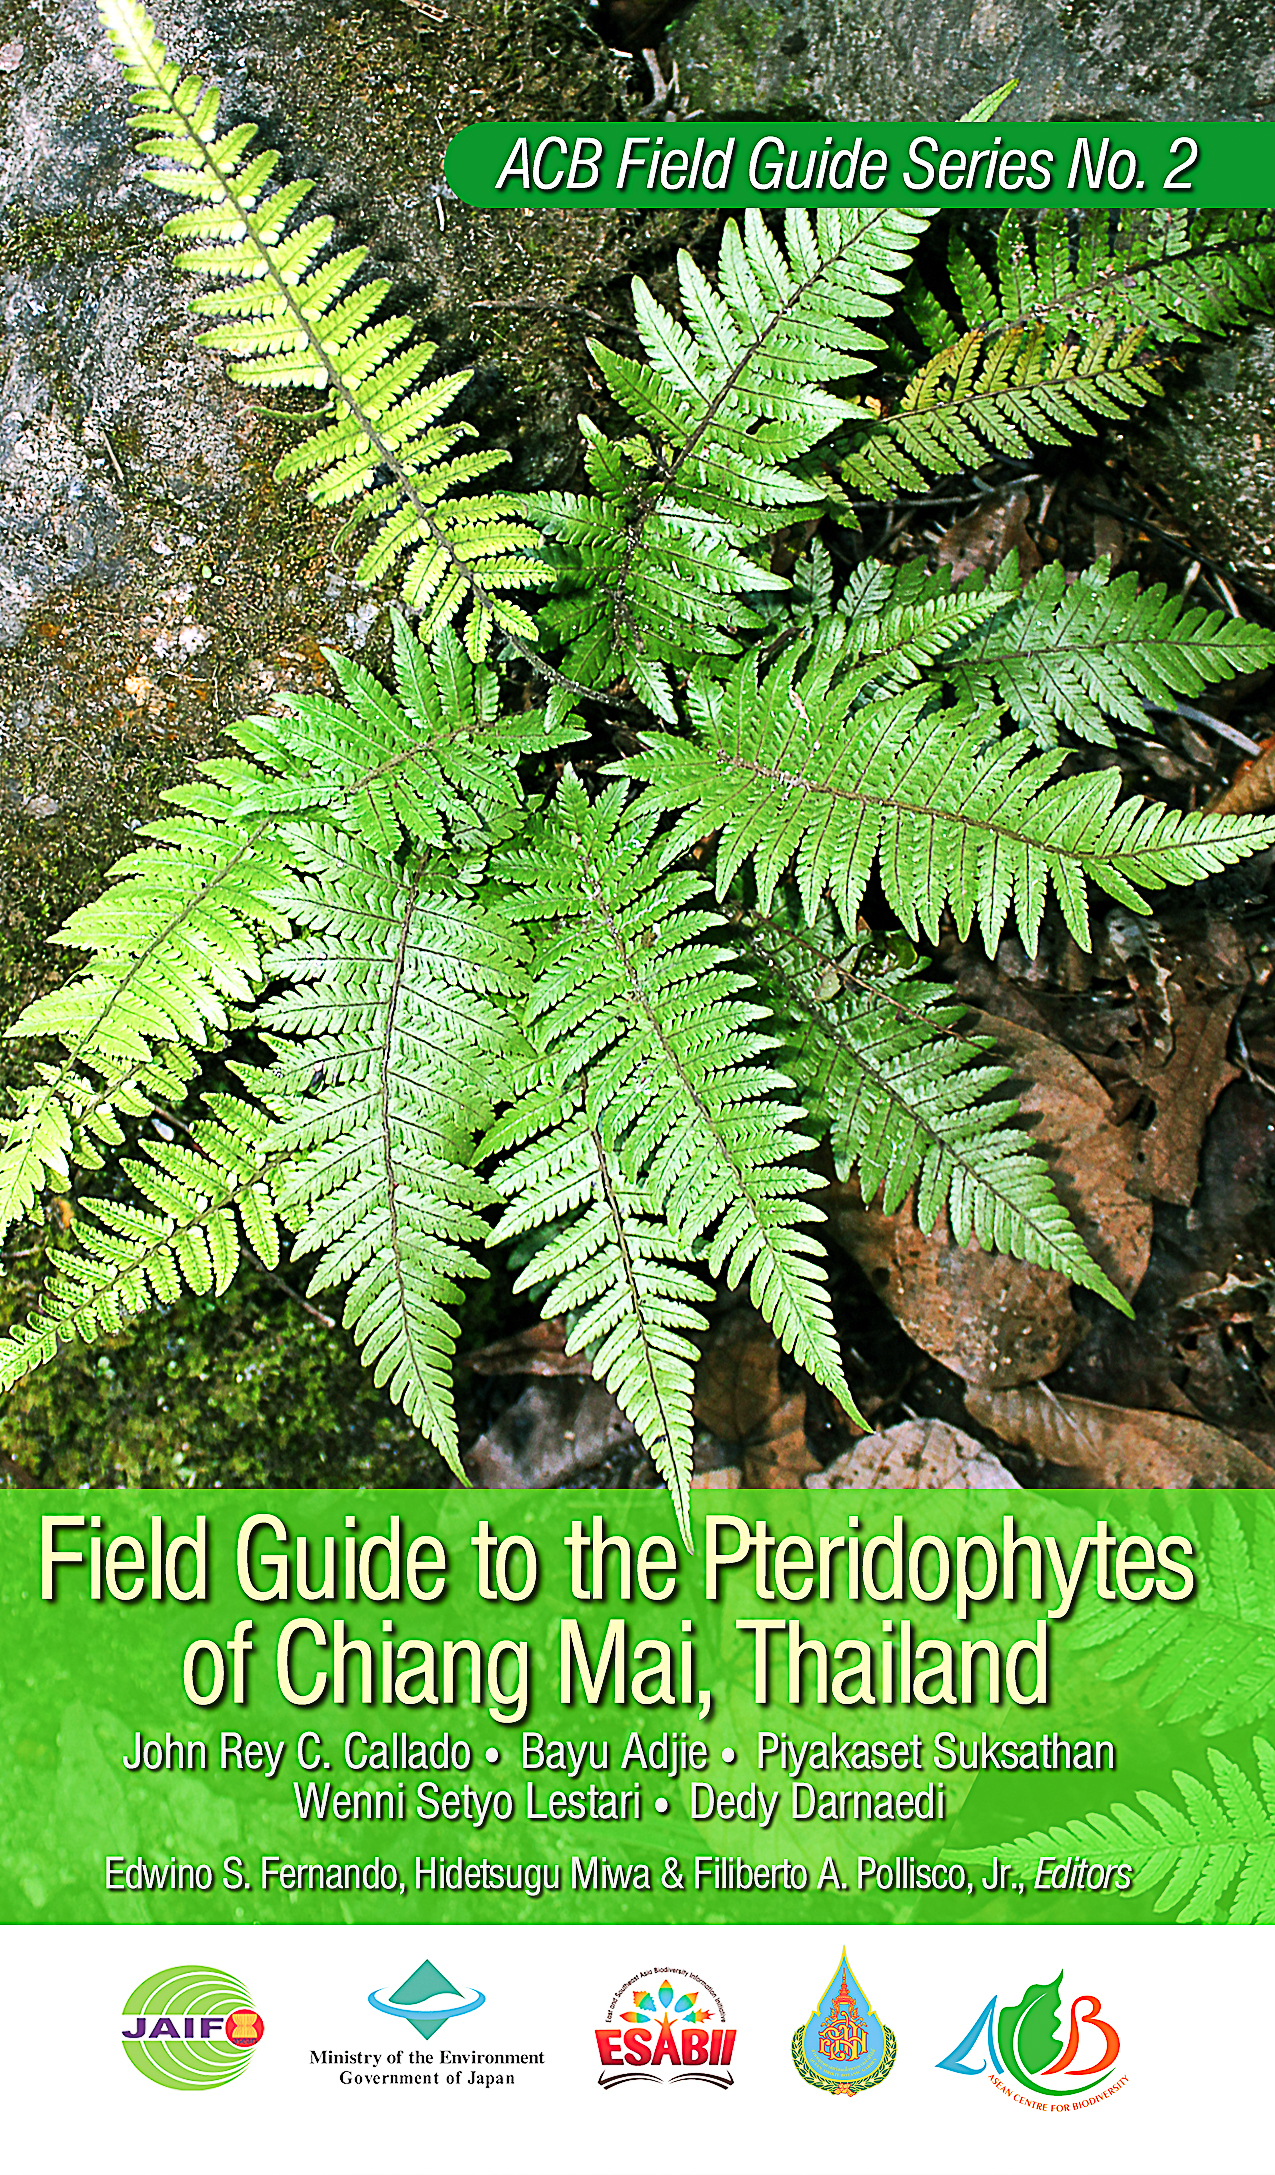 Field Guide to the Pteridophytes of Chiang Mai, Thailand